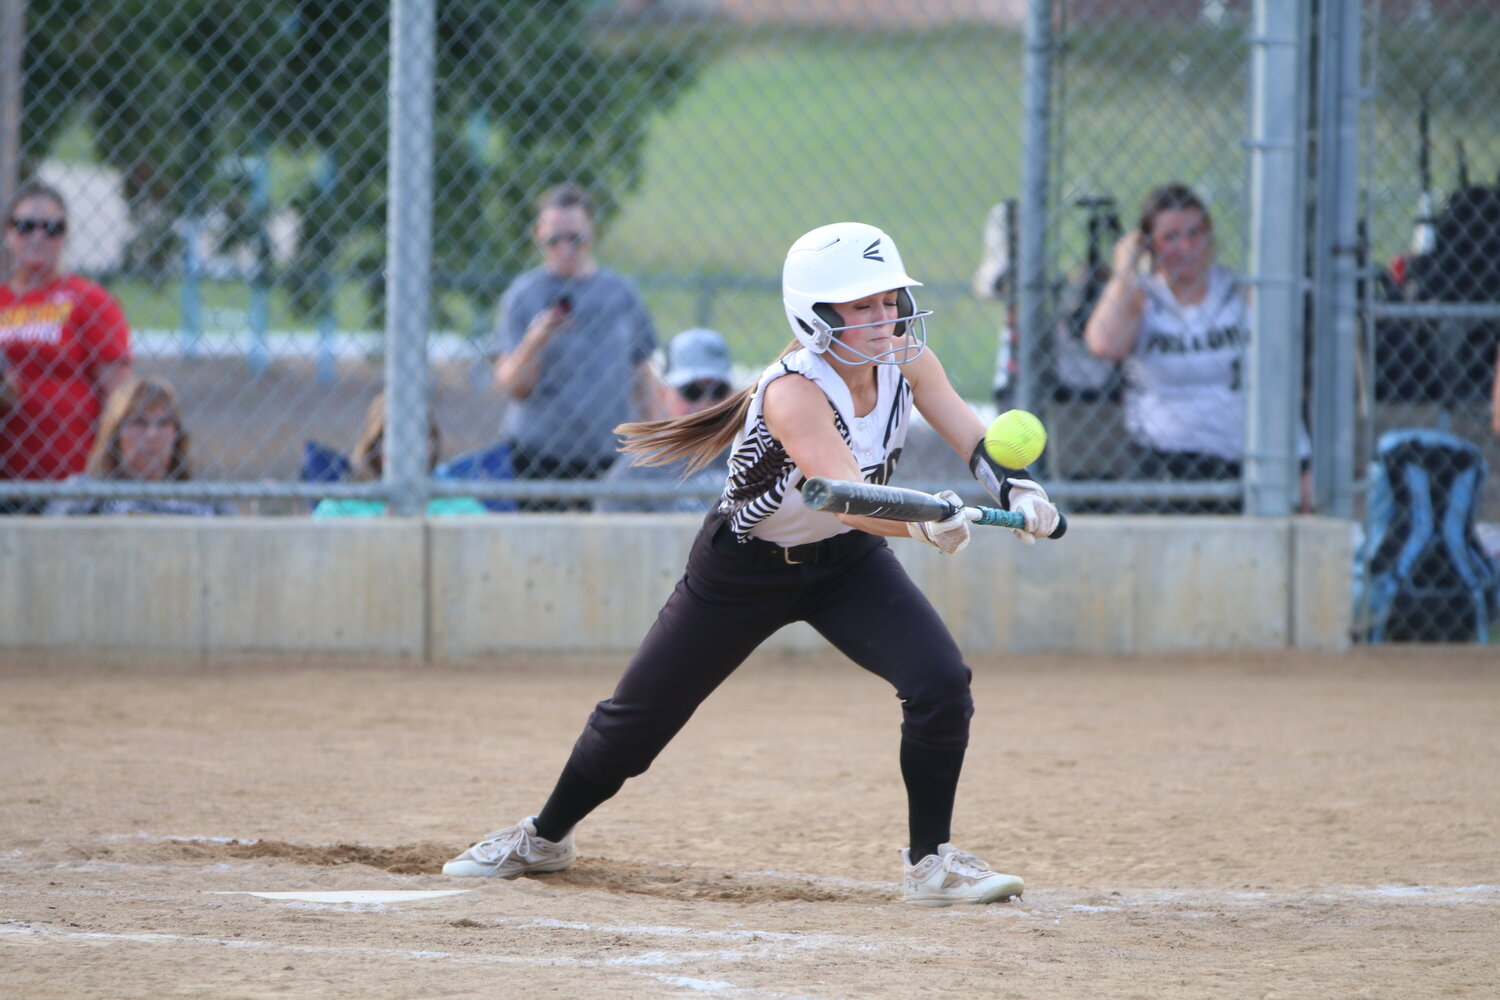 Junior Whitley Sunderland lays down a bunt for a single in the bottom of the sixth.